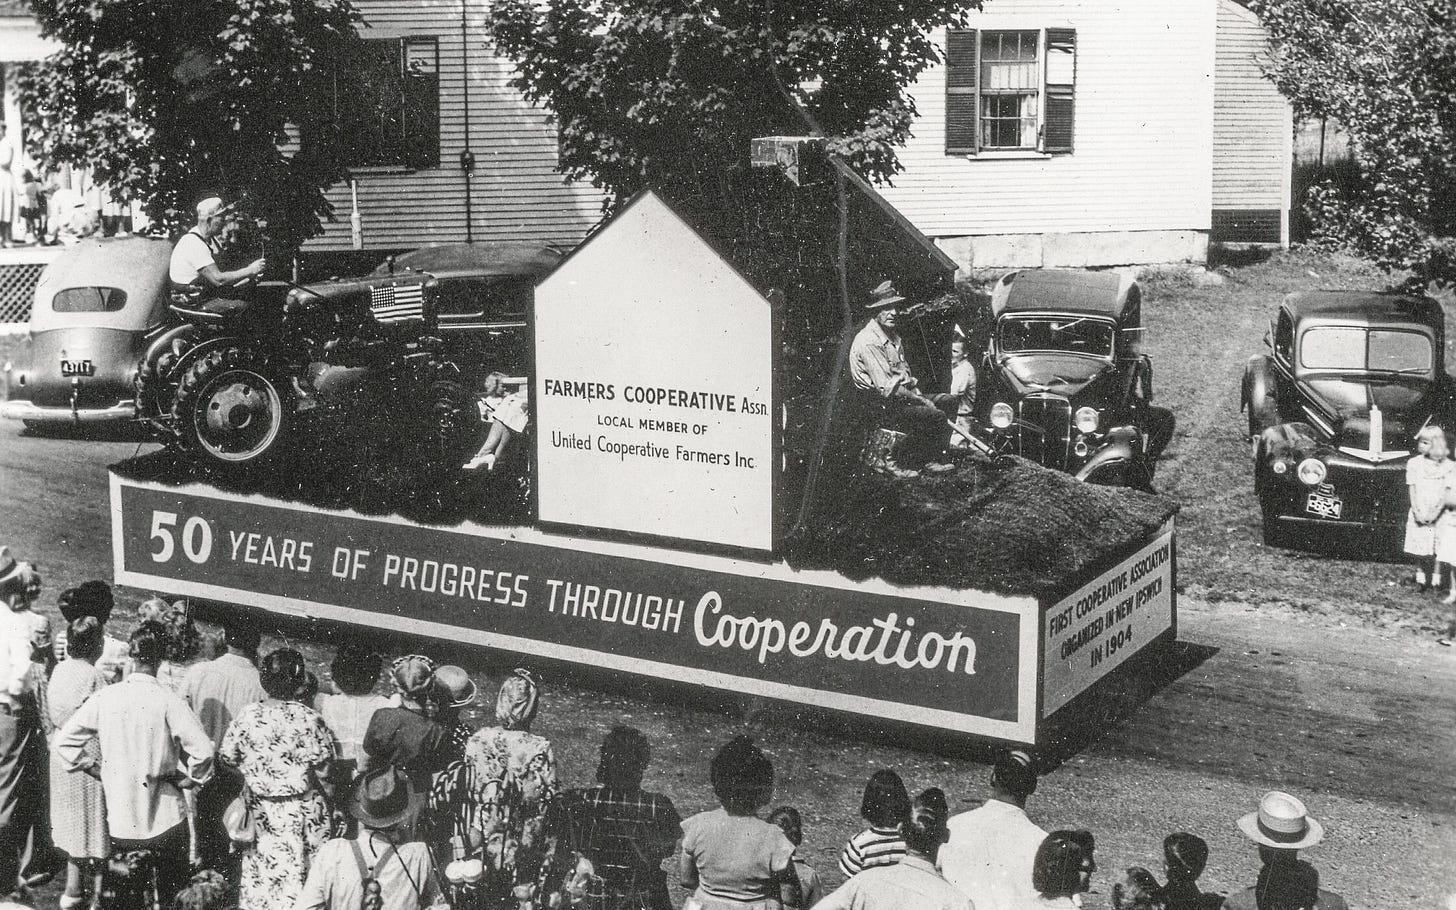 Farmer's Coop float in parade